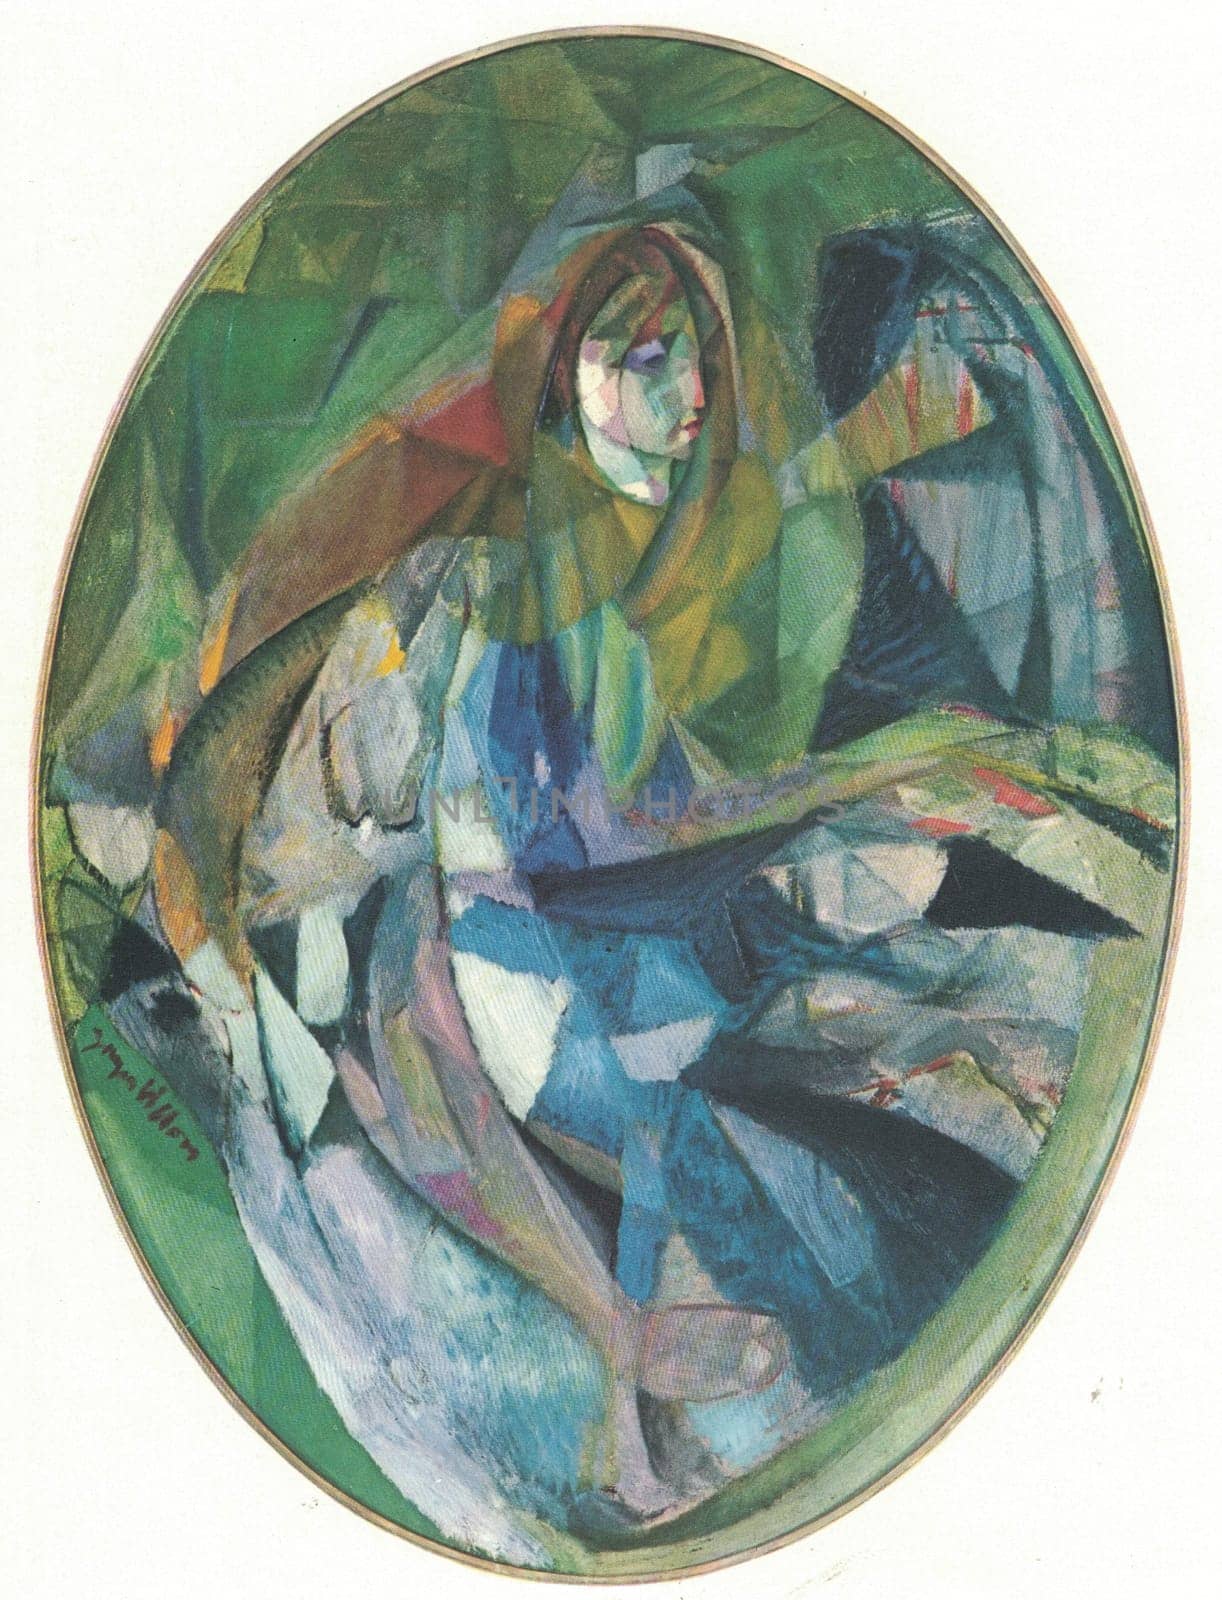 Girl at the Piano, 1912, oil on canvas. . Painting by Jacques Villon. French painter and printmaker Jacques Villon advanced the evolution of Cubism in Paris in the early 20th century. Unlike the reduced palette of the earliest iteration of Cubism, many of Villon’s paintings explore truncated forms and planar shifts through relatively saturated colors, rich chromatic contrasts and figural or landscape compositions. Alongside his brother Raymond Duchamp, he founded the Puteaux Group, Cubist group which included Fernand Léger, Robert Delaunay,and Francis Picabia. Villon contributed to the development of the 1912 Salon de la Section d’Or, a critical exhibition for the rise of Cubism and Orphism.